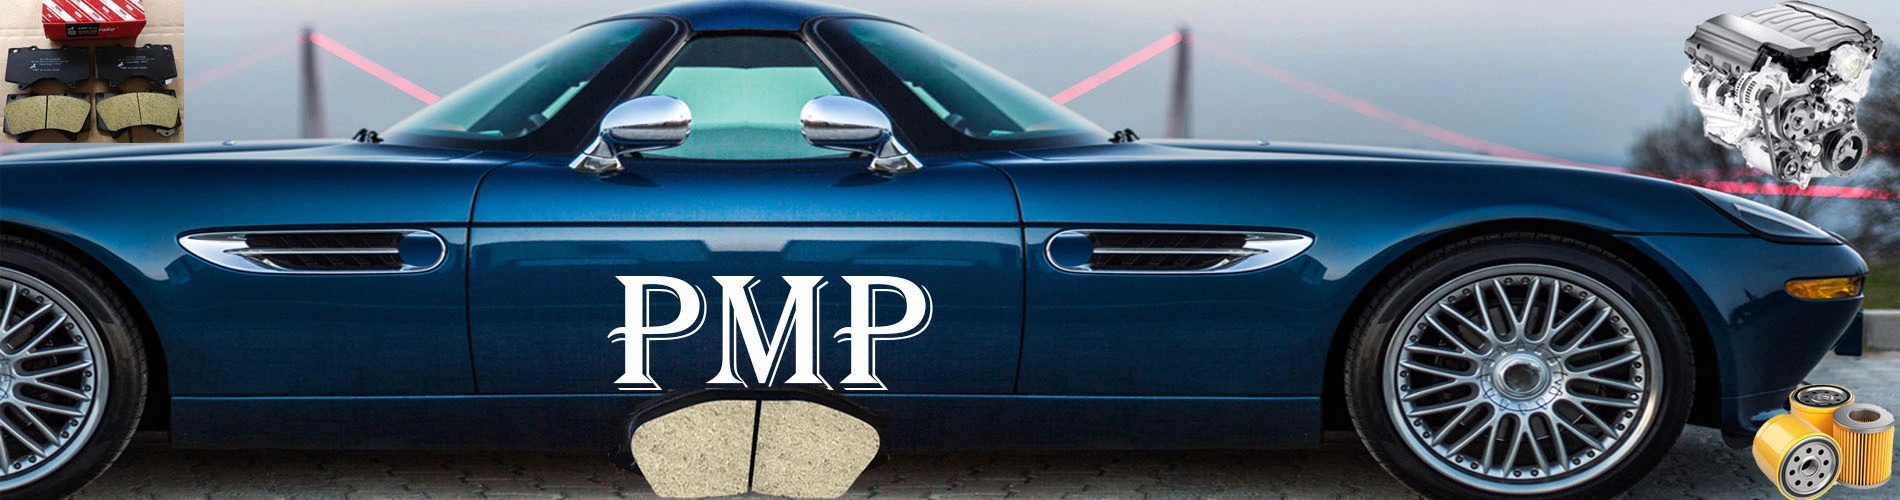 A car with the words PMP on it, showcasing Cars Auto Parts branding.